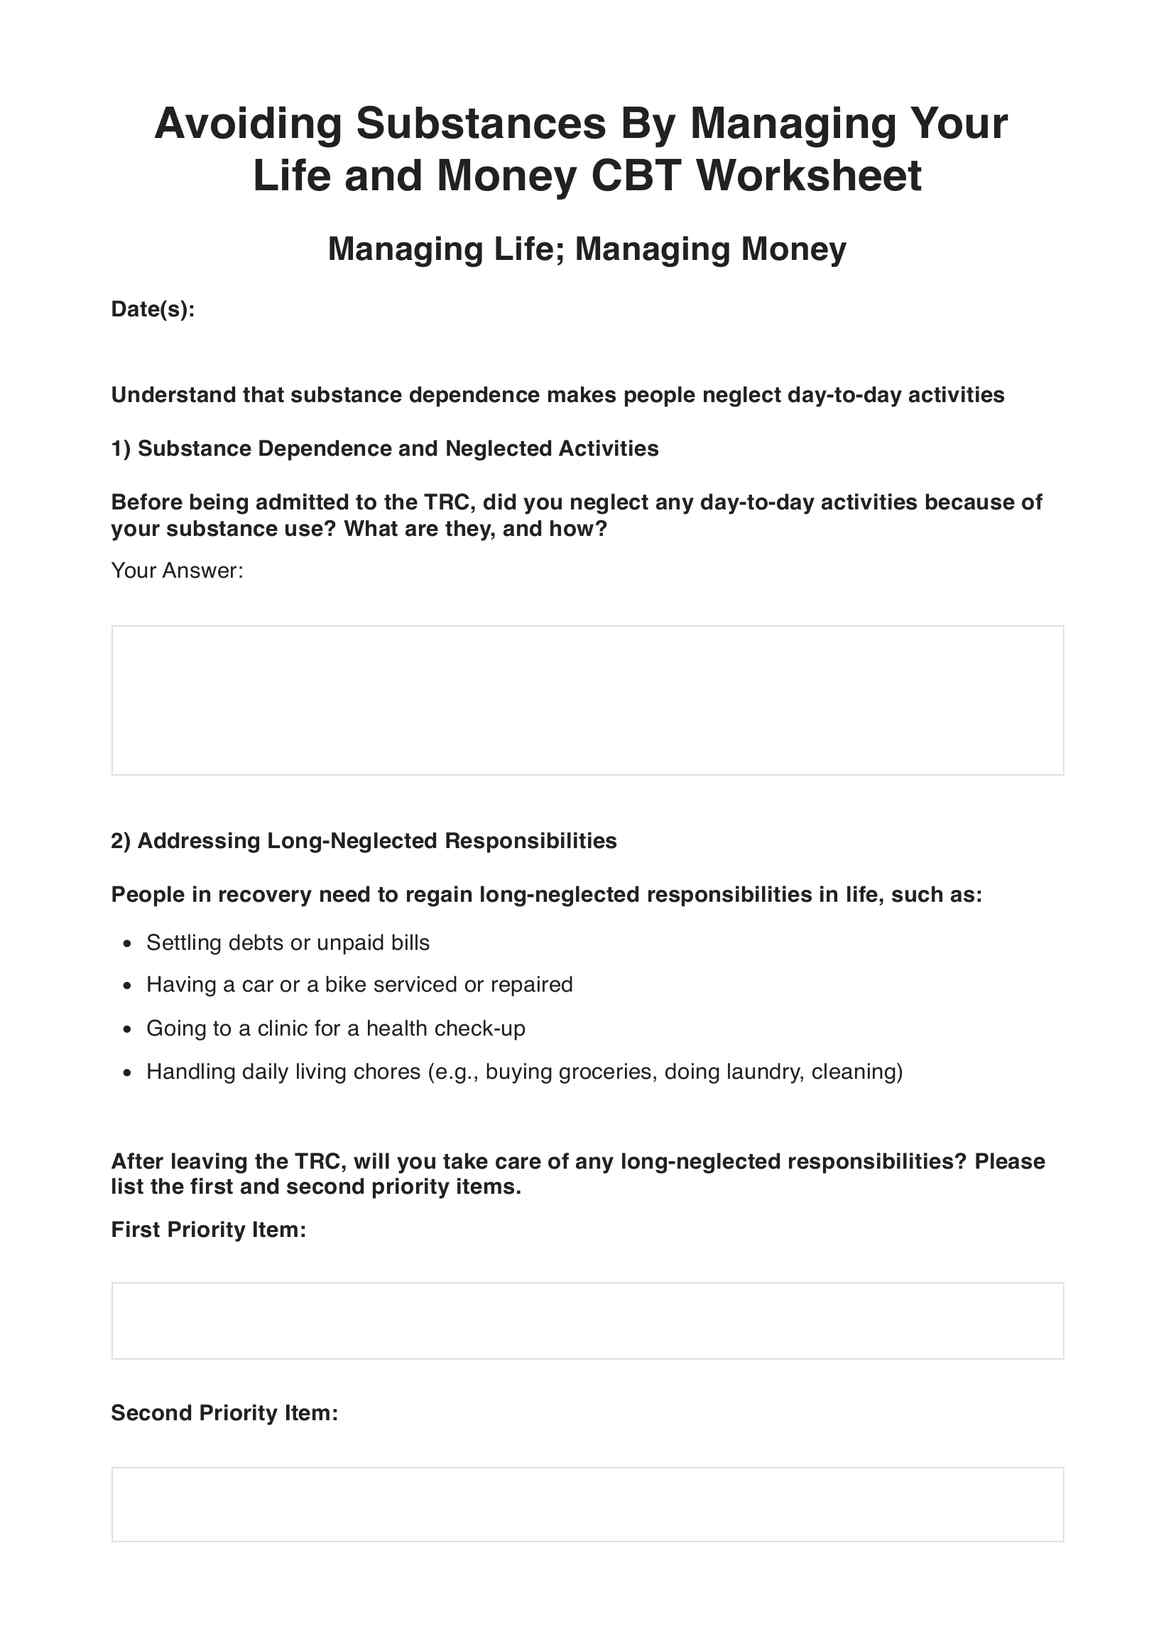 Avoiding Substances By Managing Your Life and Money CBT Worksheet PDF Example